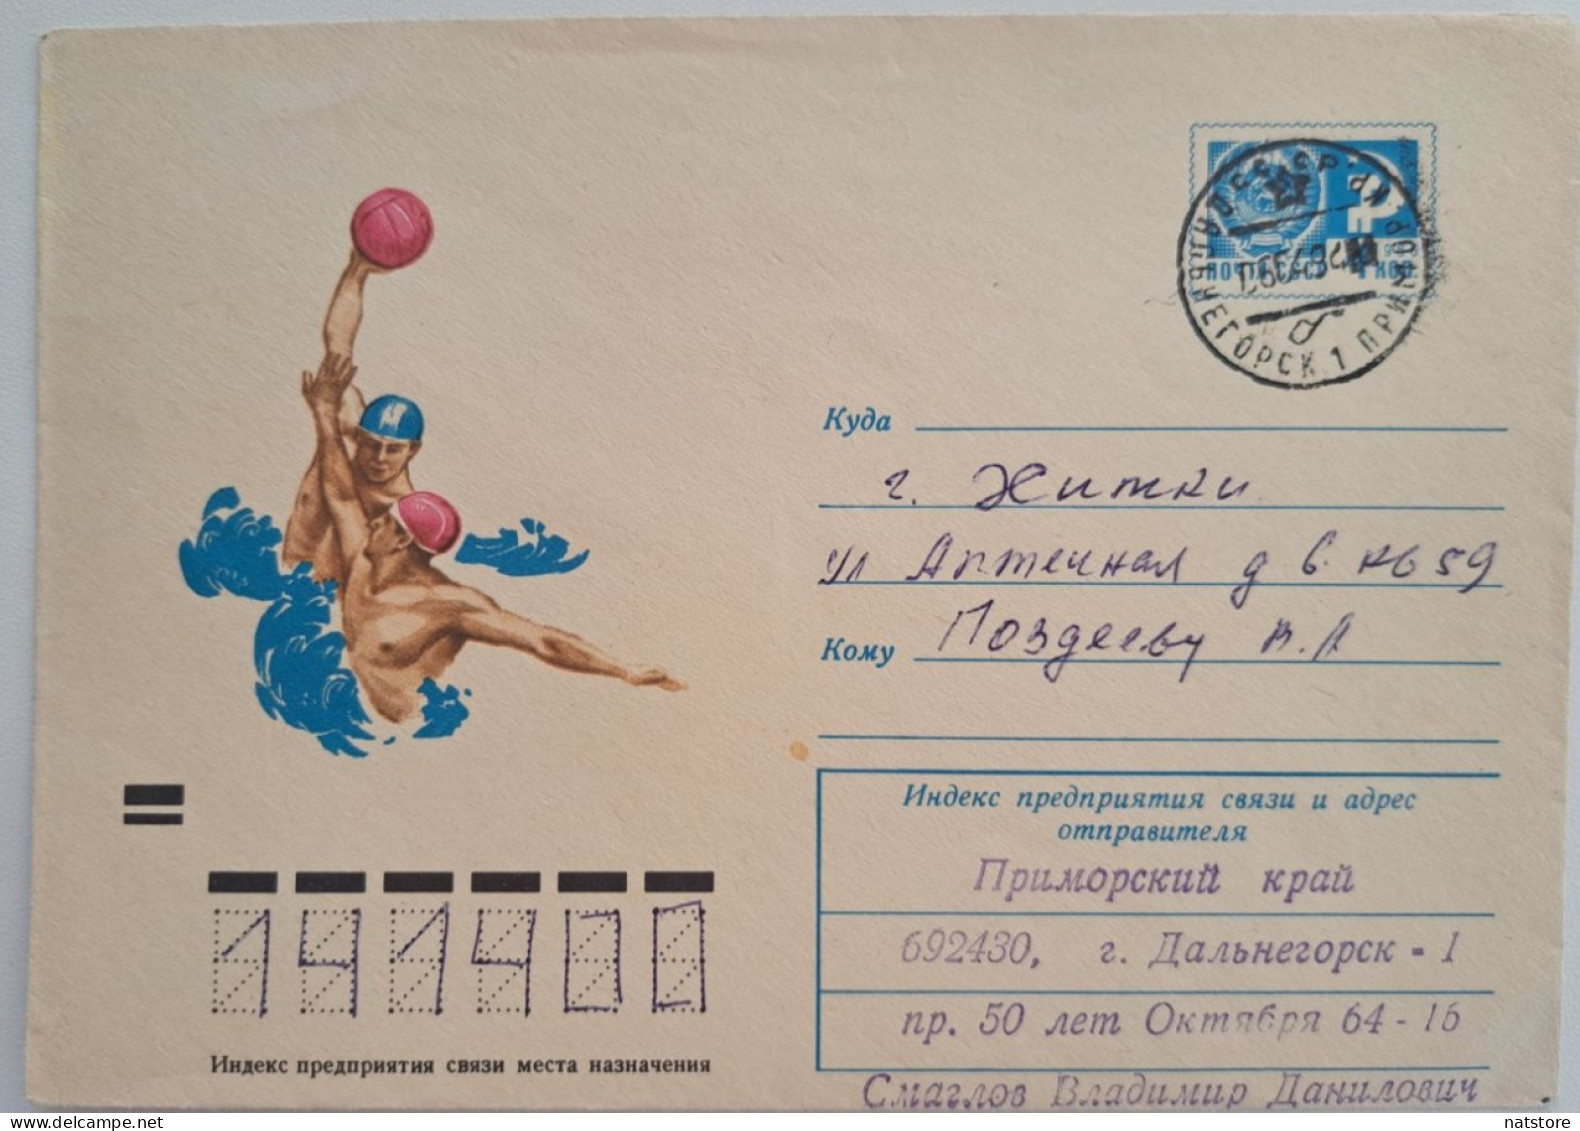 1972..USSR..COVER WITH STAMP..PAST MAIL..WATER POLO - Wasserball